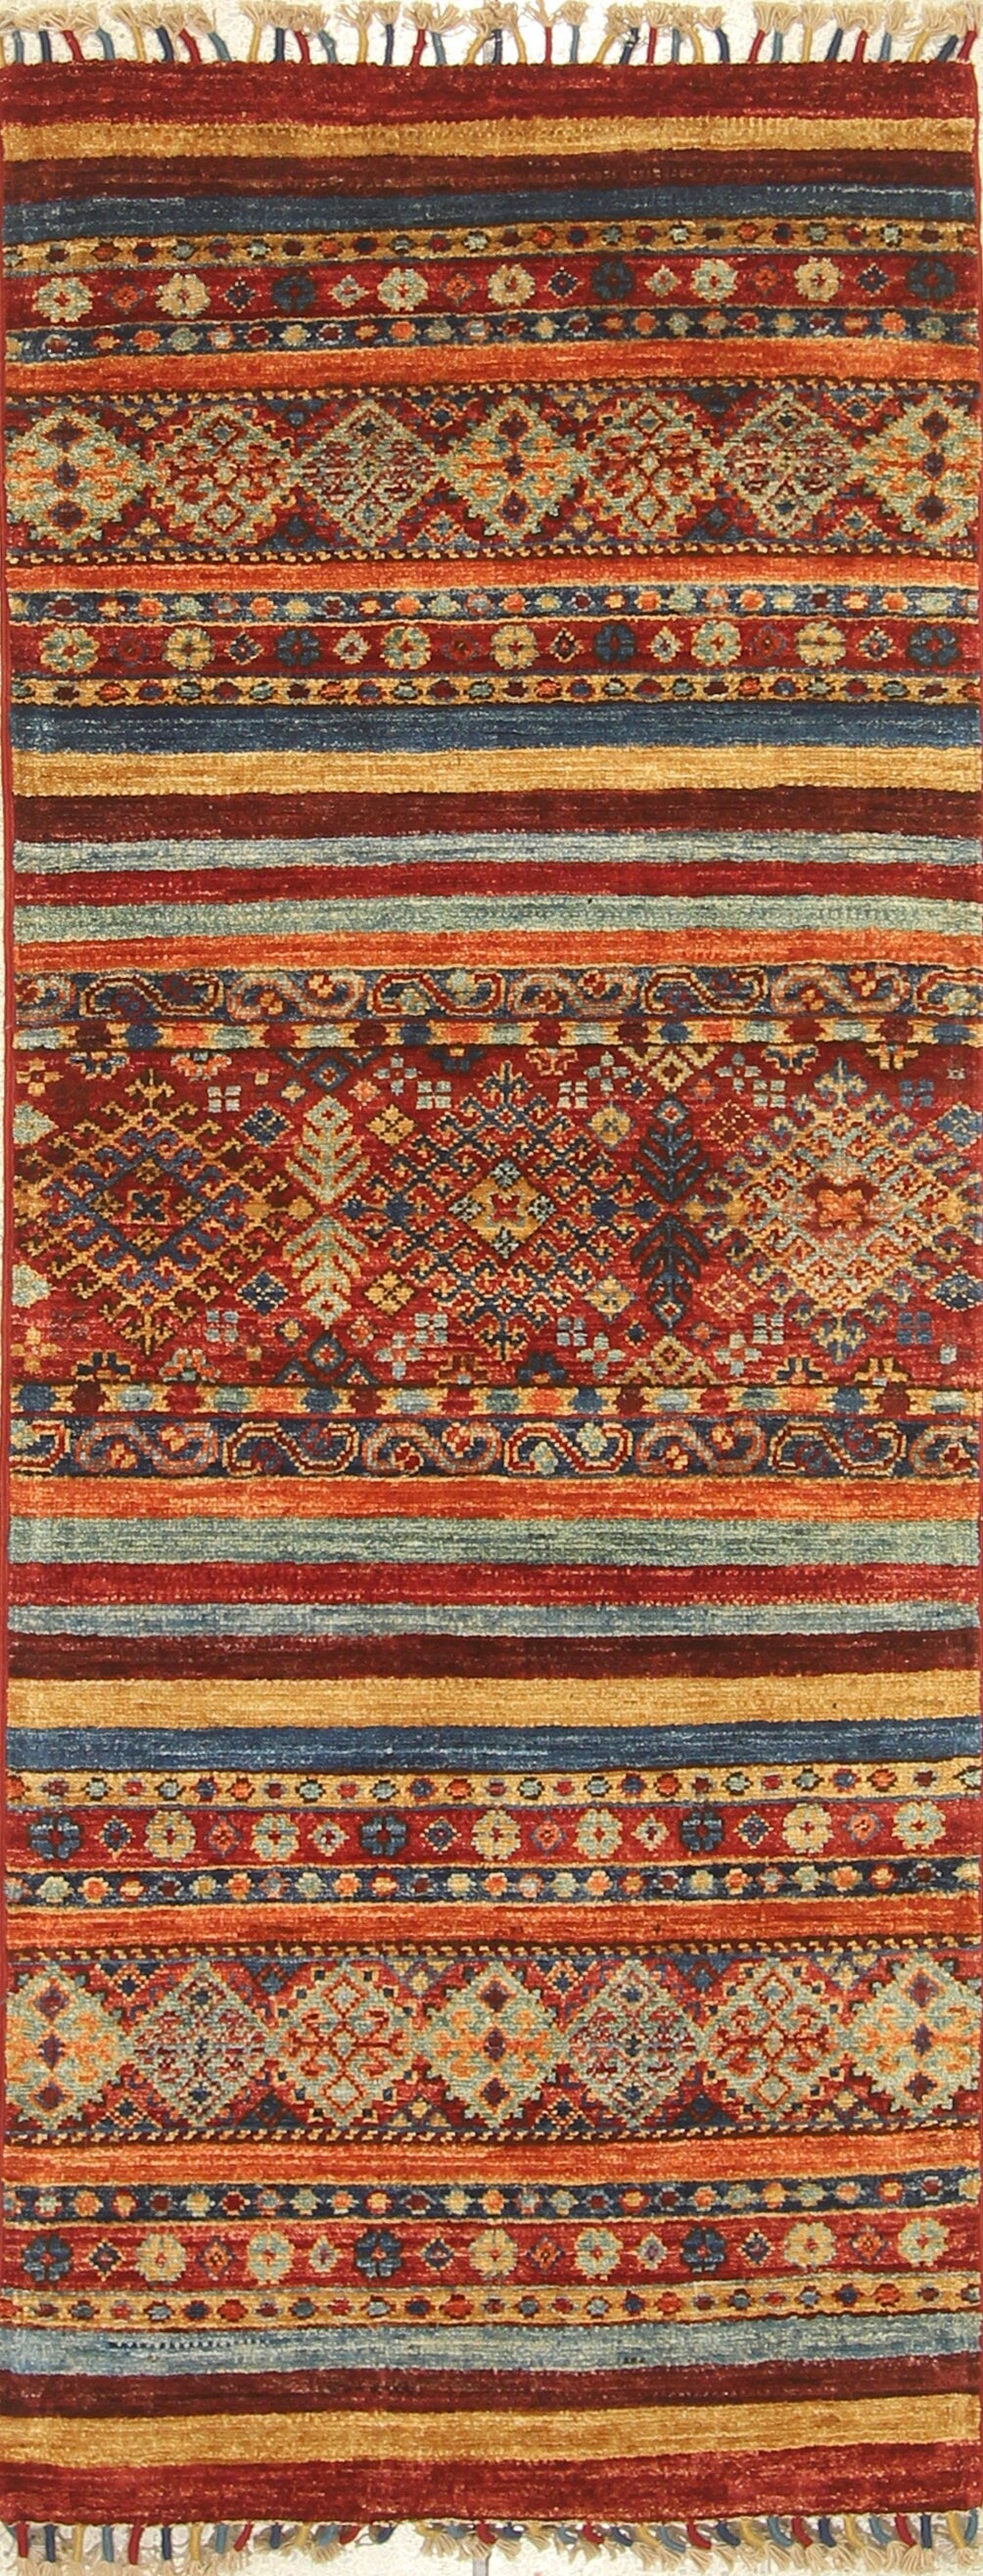 6 ft Tribal Red Multicolor Afghan hand knotted Narrow Runner Rug